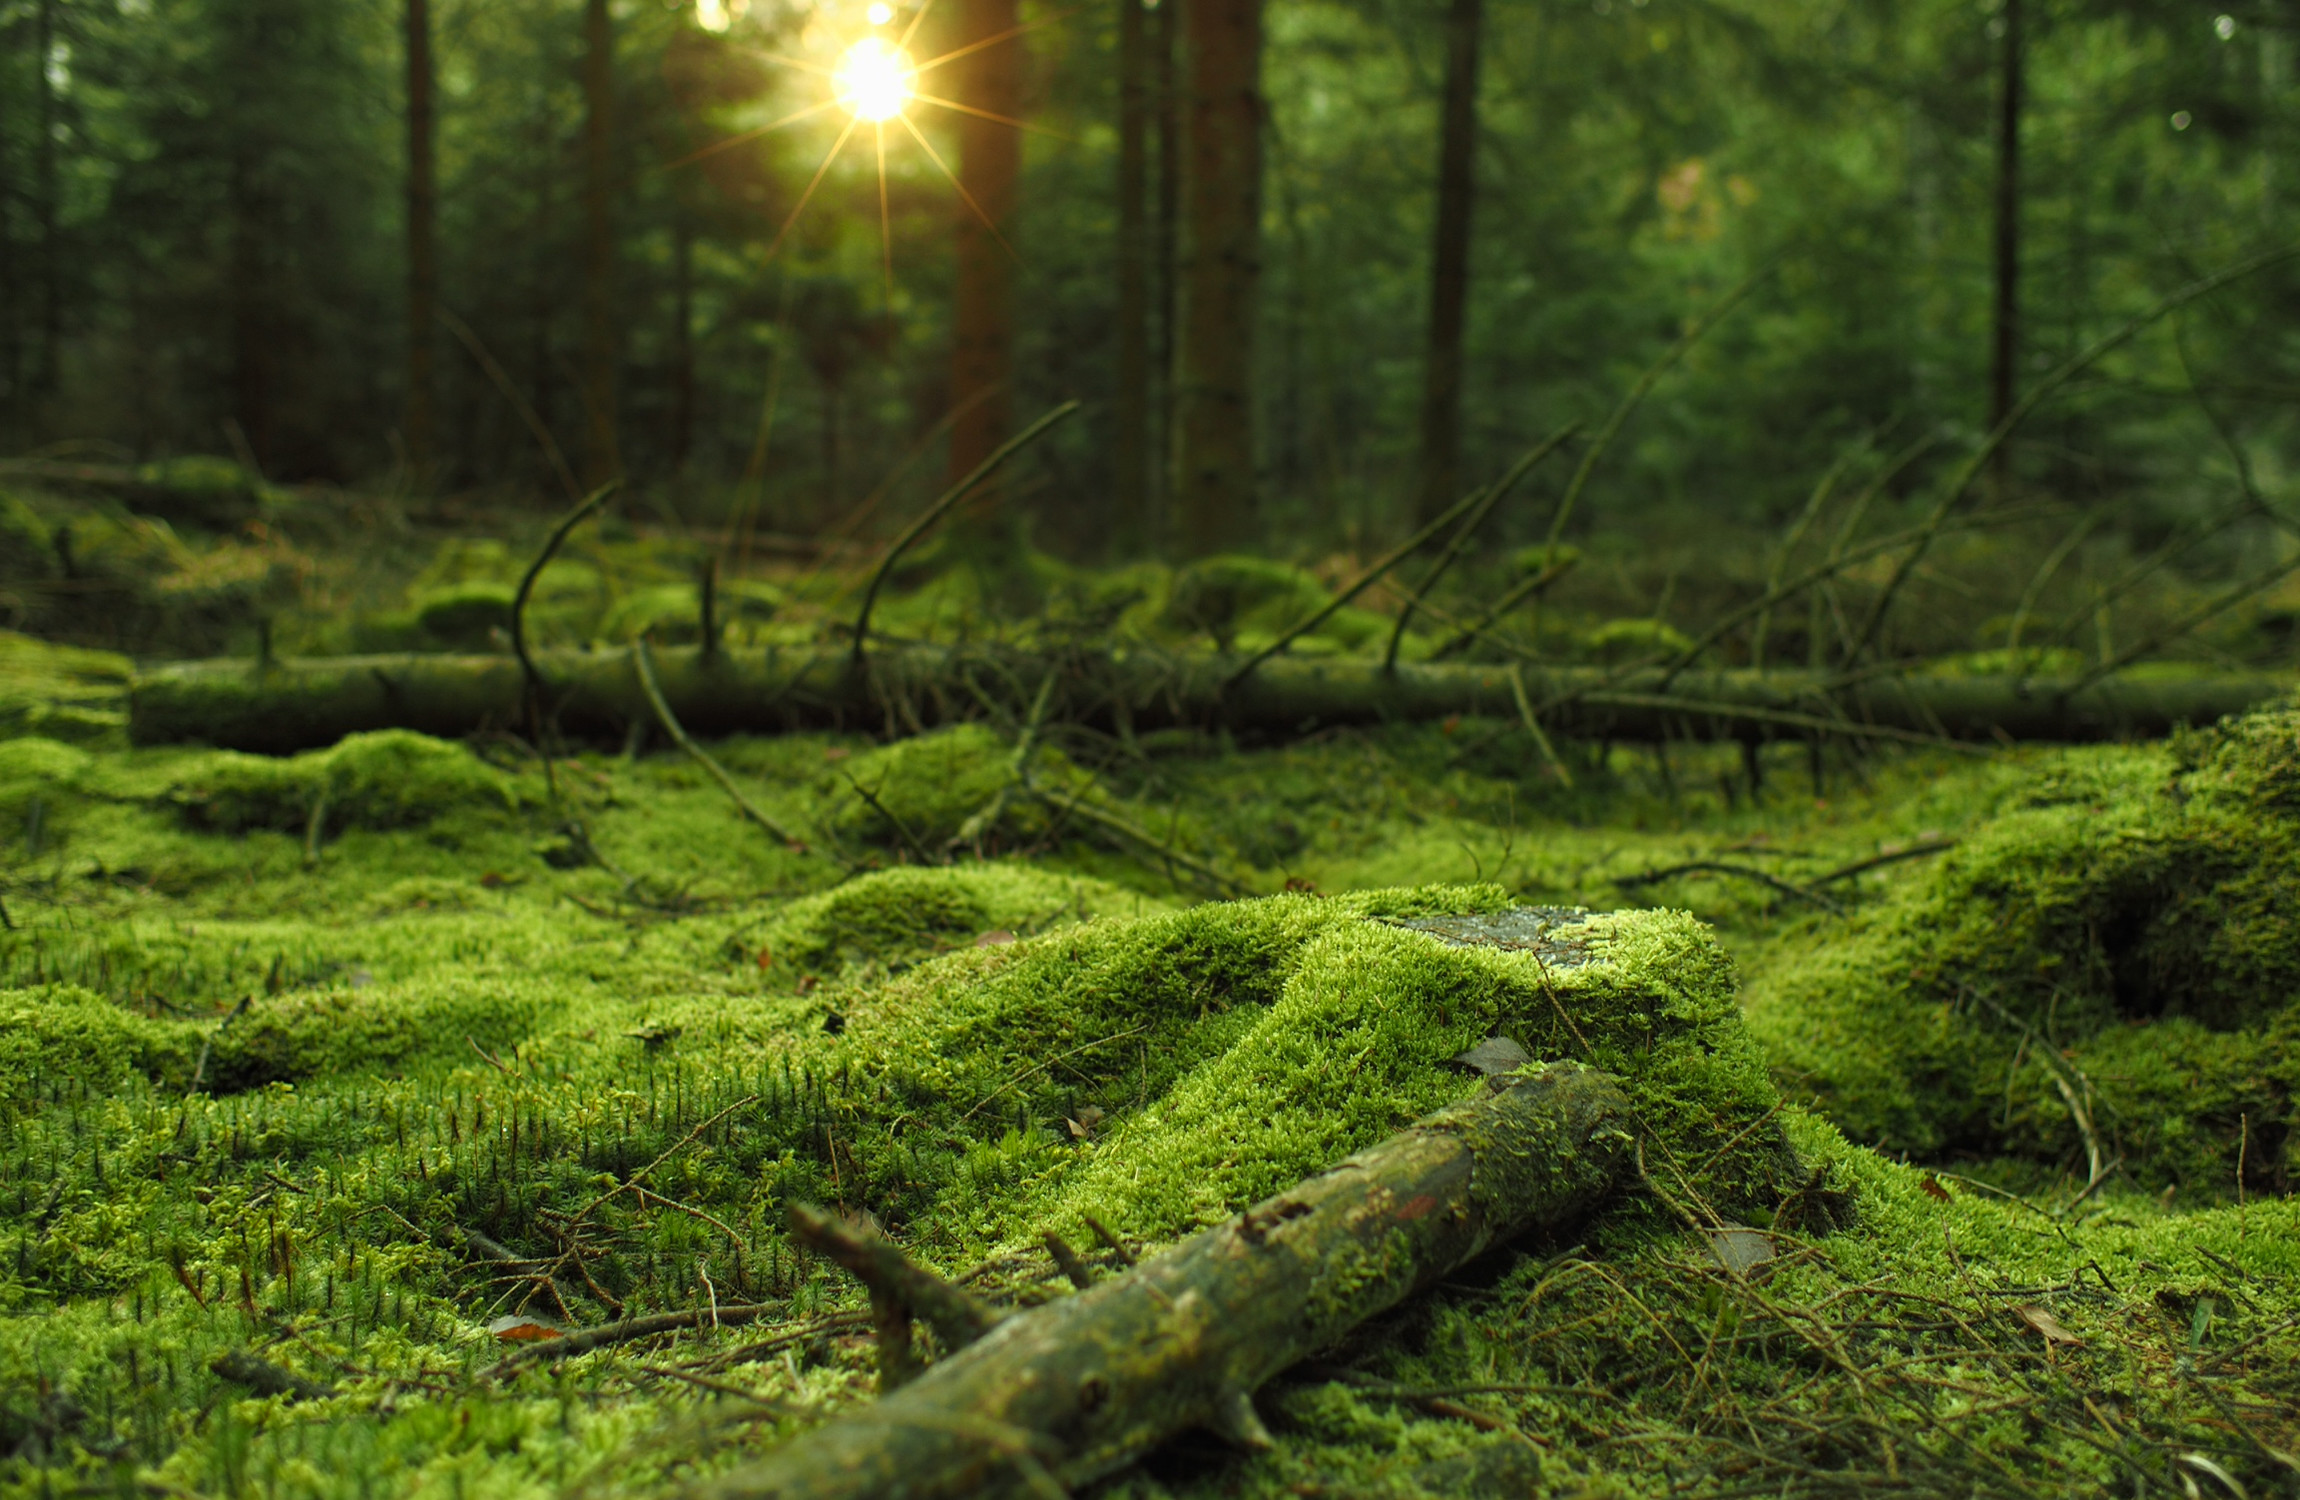 2300x1500 Mossy forest HD wallpaper. Download ...